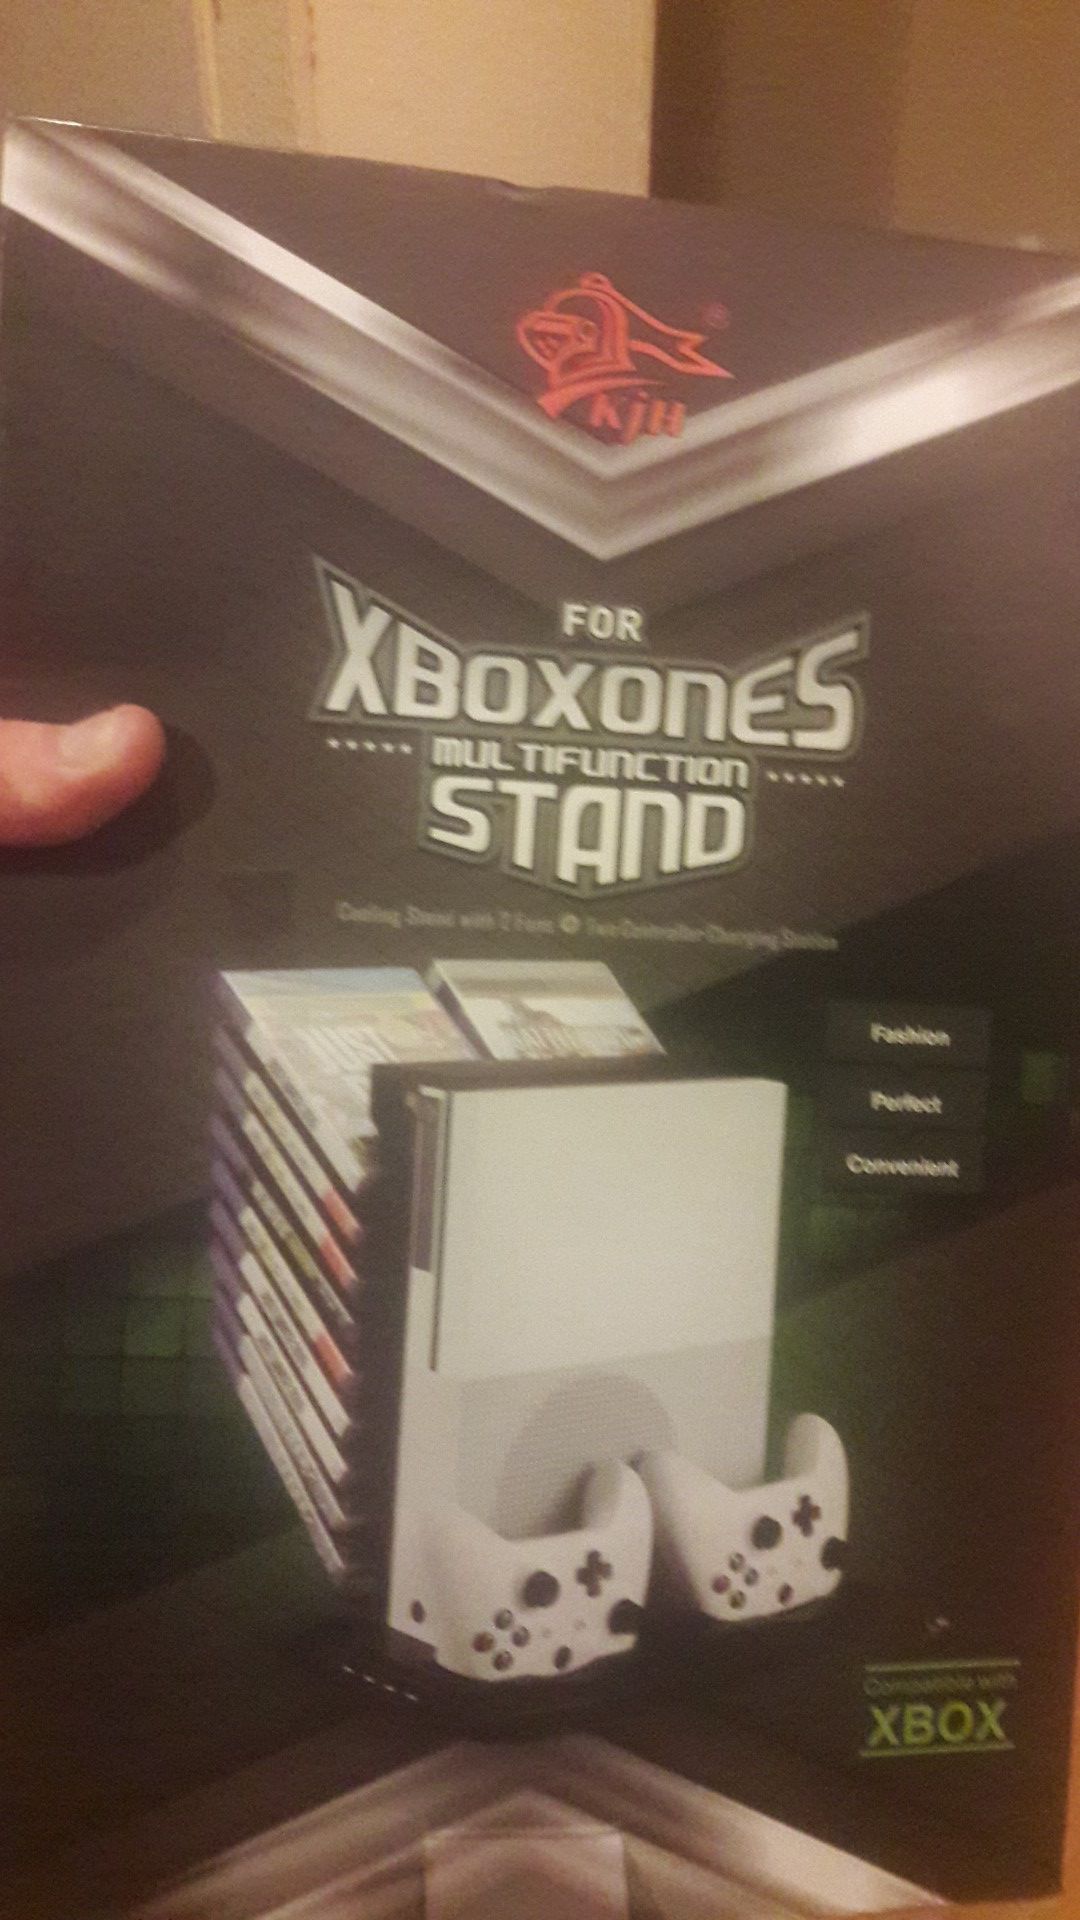 XBOX ONE Multifunction Stand